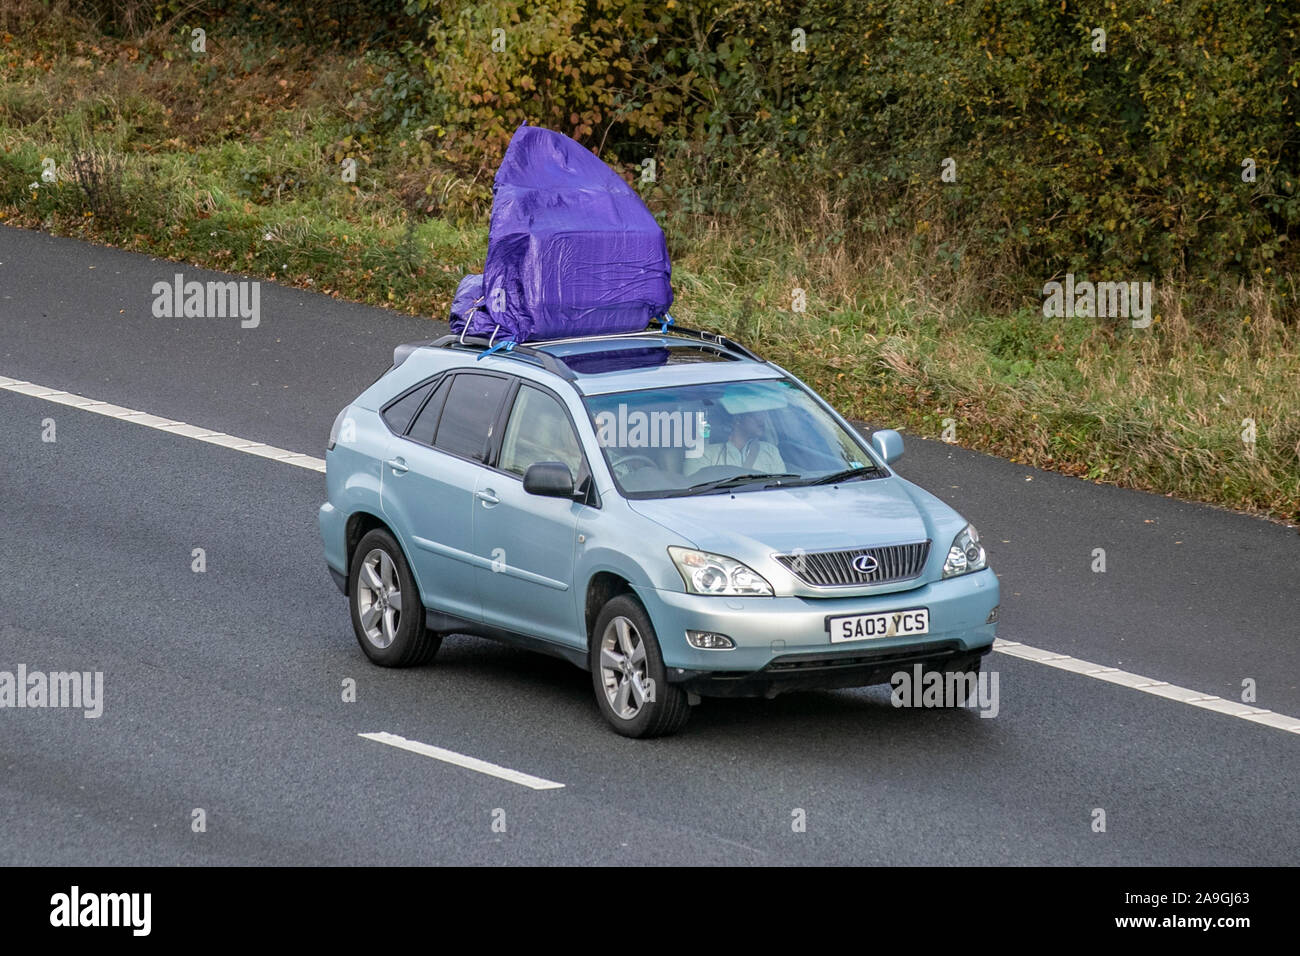 Projecting dangerous load being carried by 2003 blue Lexus Rx300 SE Auto; UK Vehicular traffic, transport, modern vehicles, saloon cars, south-bound on the 3 lane M61 motorway highway. Stock Photo